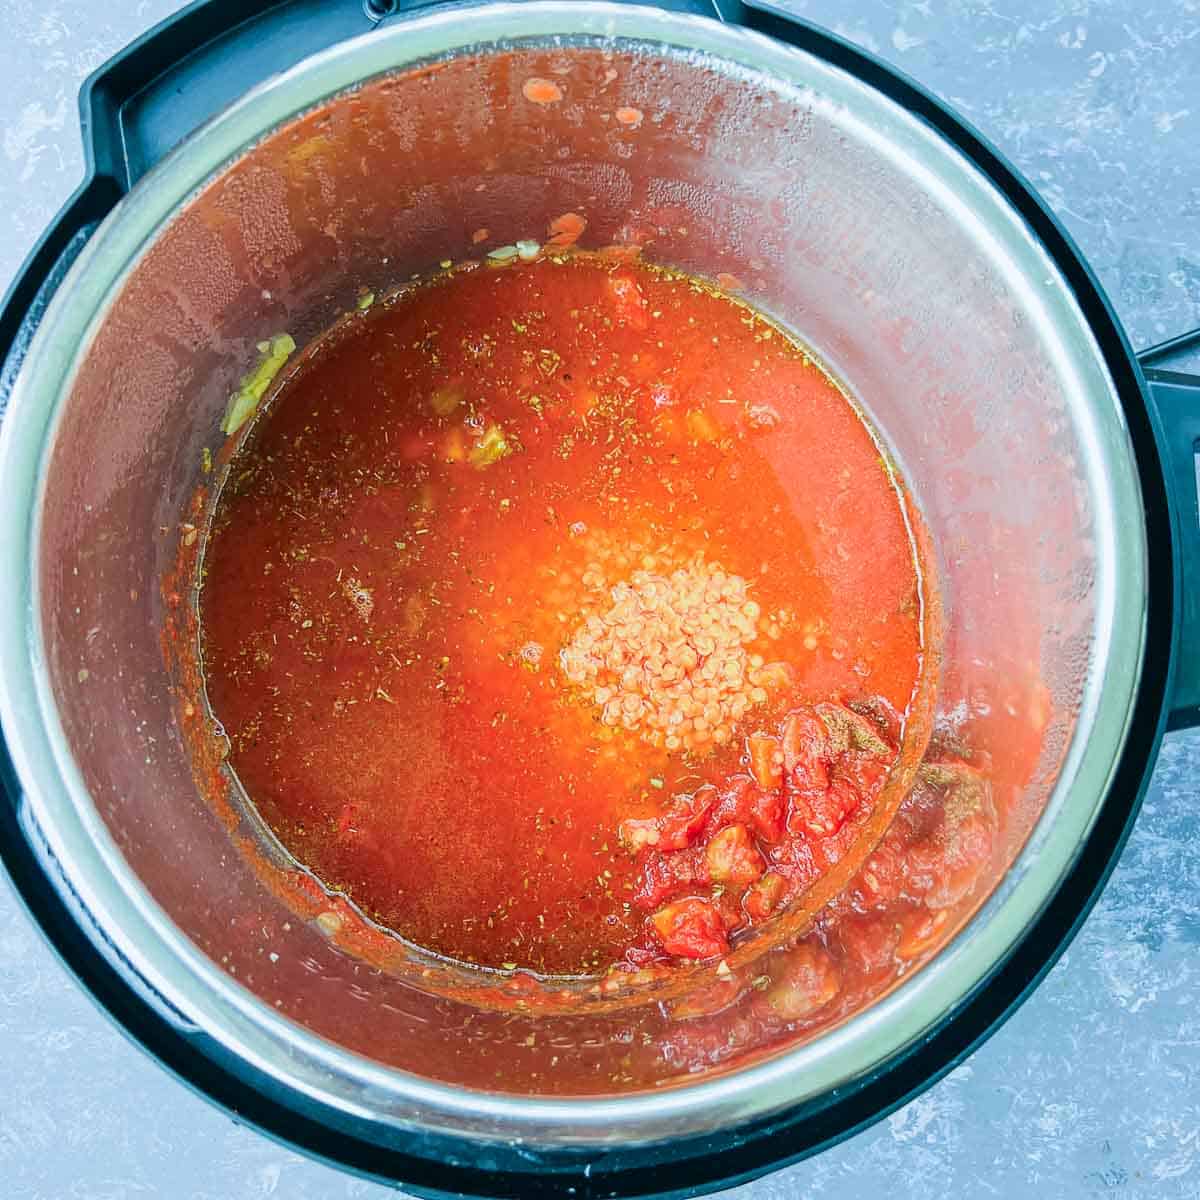 Tomatoes, lentils, spices, and stock added to the Instant Pot.